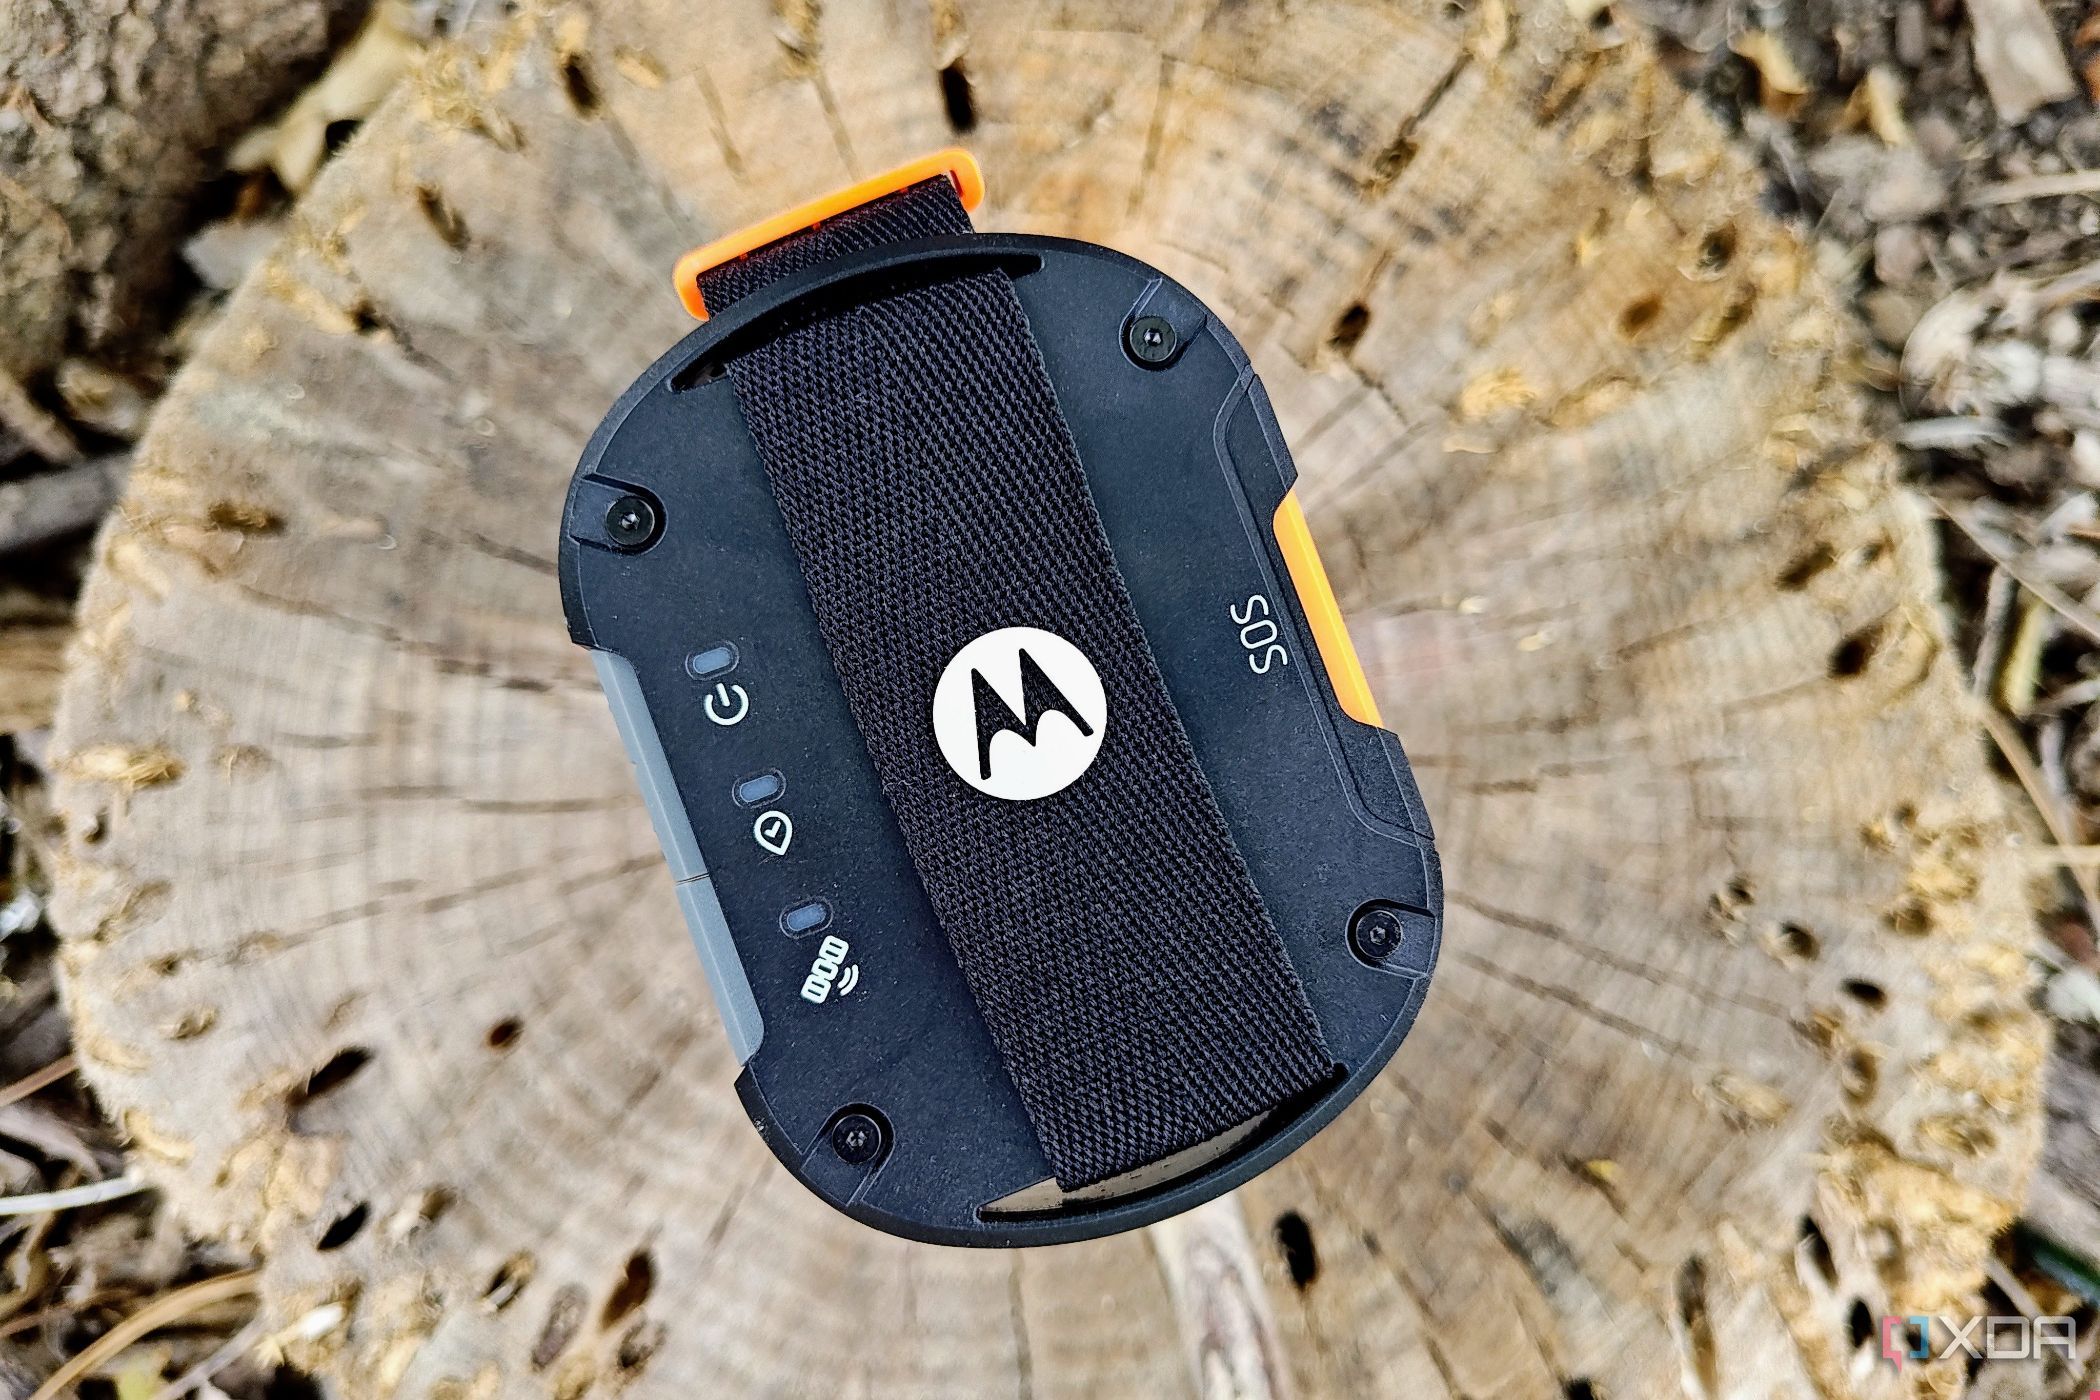 Motorola Defy Satellite Link review: This device can be a real lifesaver